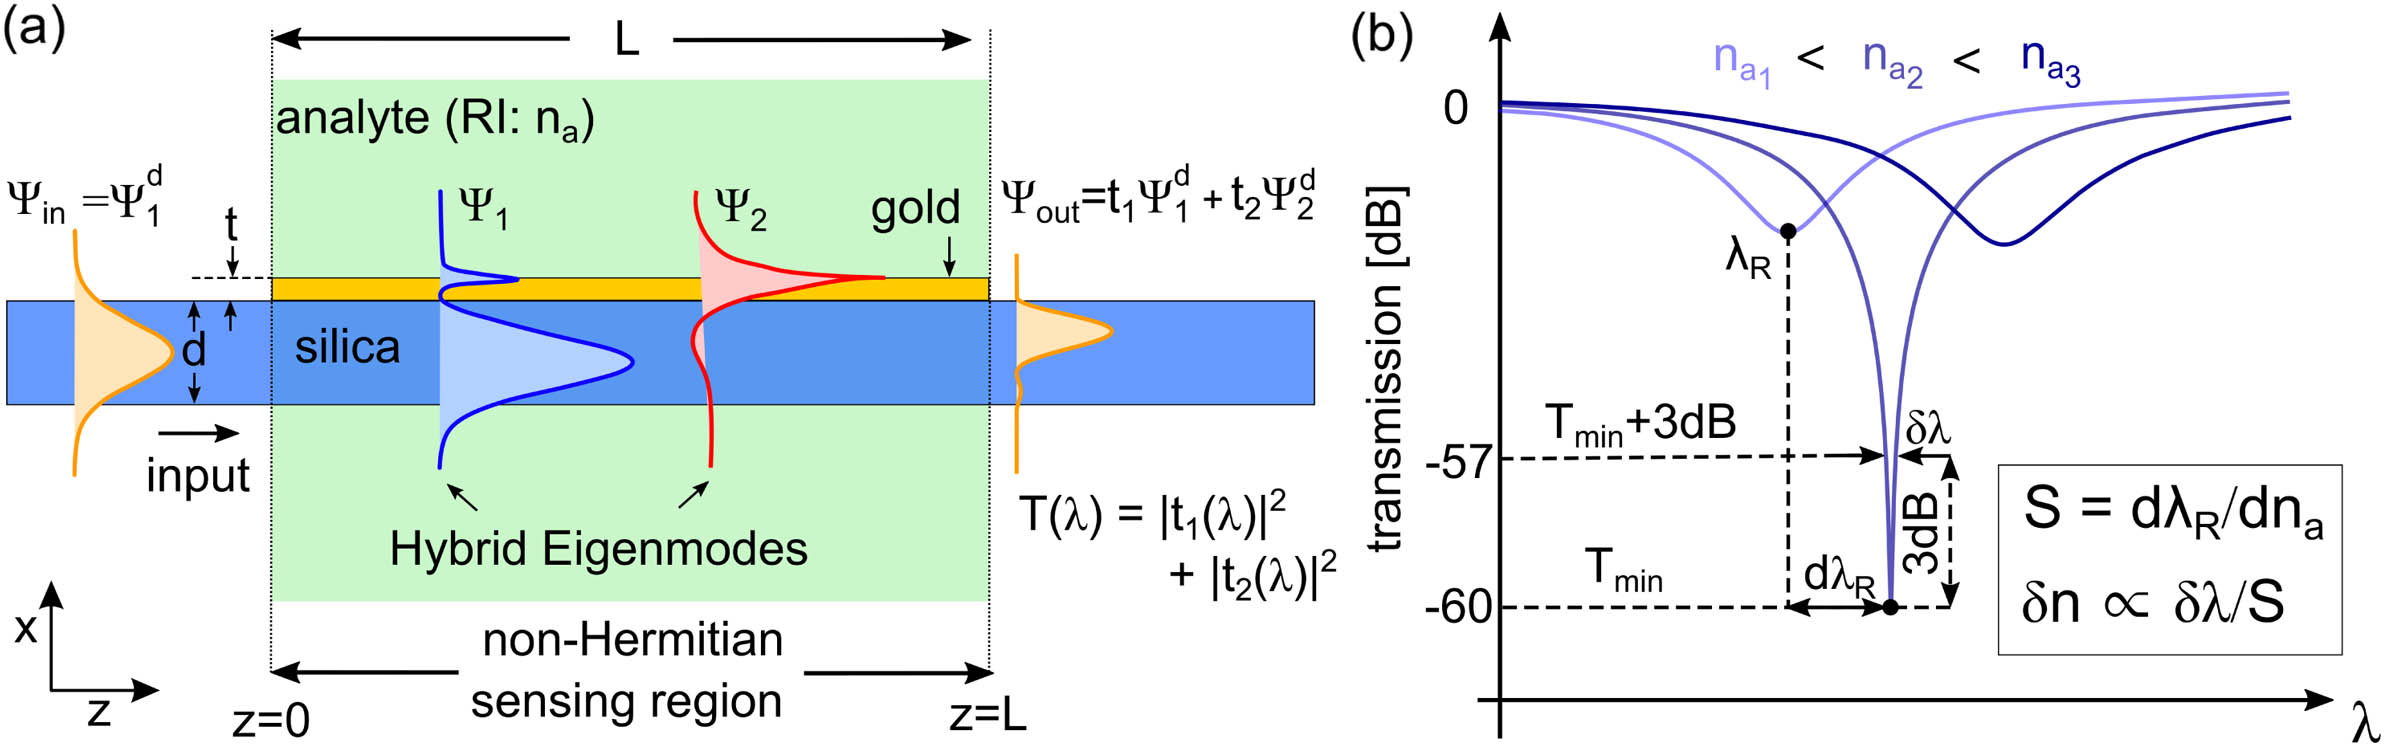 Concept schematic of the plasmonic waveguide sensor considered. The fundamental mode input of a dielectric silica waveguide (width: d; field: ψin=ψ1d) couples to the hybrid EMs (ψ1,2, indicated by blue and red curves) of a gold-coated region (thickness: t), surrounded by a liquid of refractive index na. The EM excitation and interference over a length L result in a wavelength-dependent transmitted power T, which can contain information on changes in na. The output field is a superposition of the dielectric waveguide EMs, ψout=t1ψ1d+t2ψ2d+…. The sensing region is lossy and thus non-Hermitian. (b) Example T(λ) spectra for increasing na. The shift in resonant wavelength λR determines the sensitivity S=dλR/dna. Each resonance possesses a characteristic 3 dB-width δλ, which depends on EM excitation and interference upon propagation. Small changes in na can be resolved for small δλ and large S, i.e., the DL is δn∝δλ/S [31].